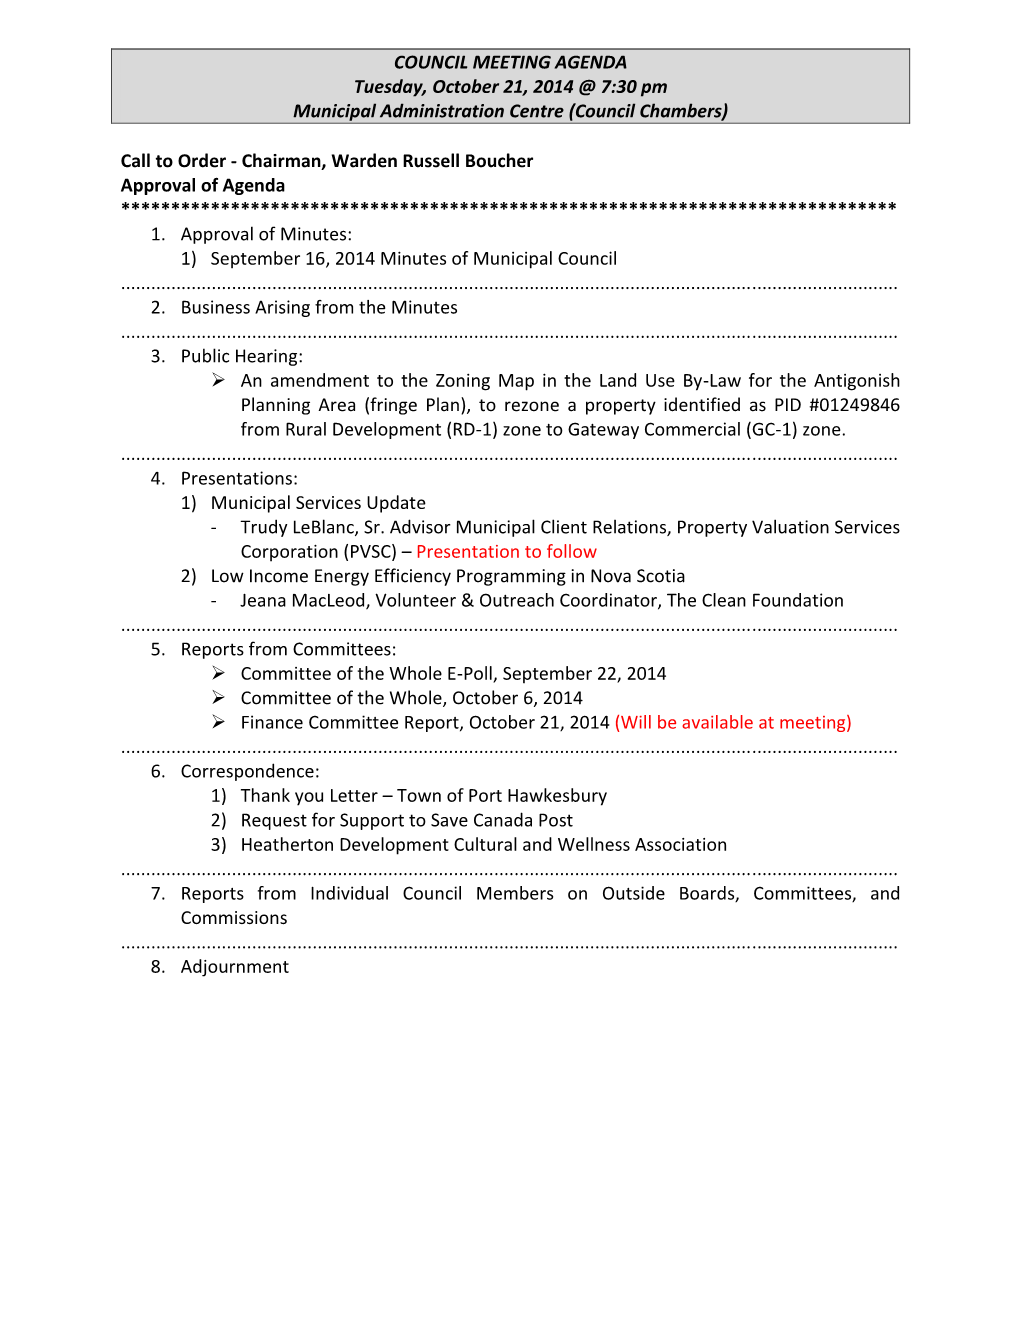 Finance Committee Report, October 21, 2014 (Will Be Available at Meeting)